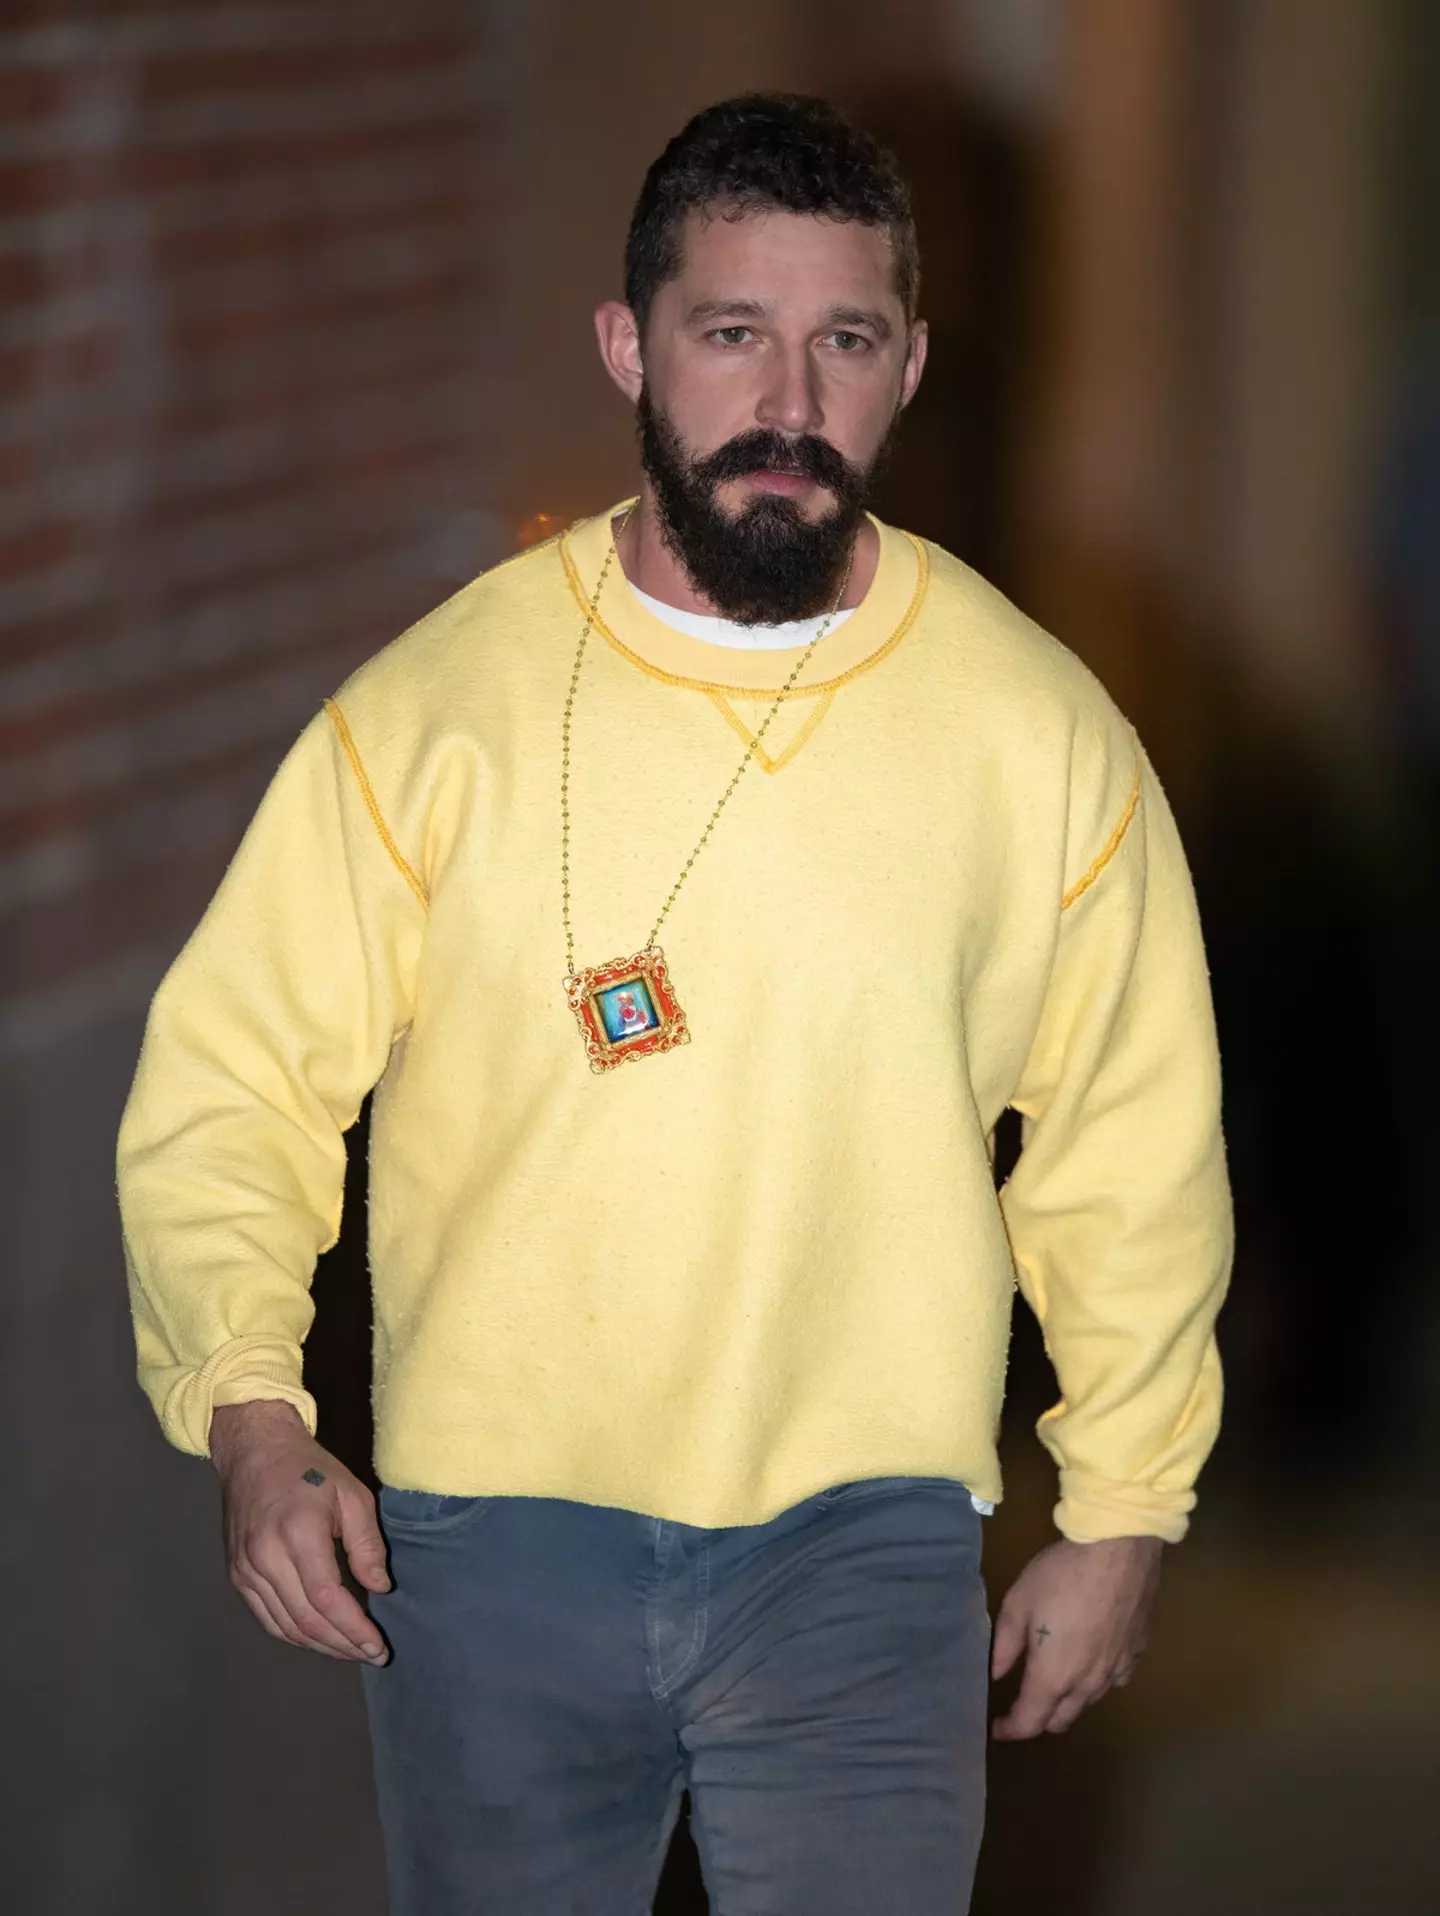 LaBeouf said his starring role in Padre Pio had a profound effect on him.